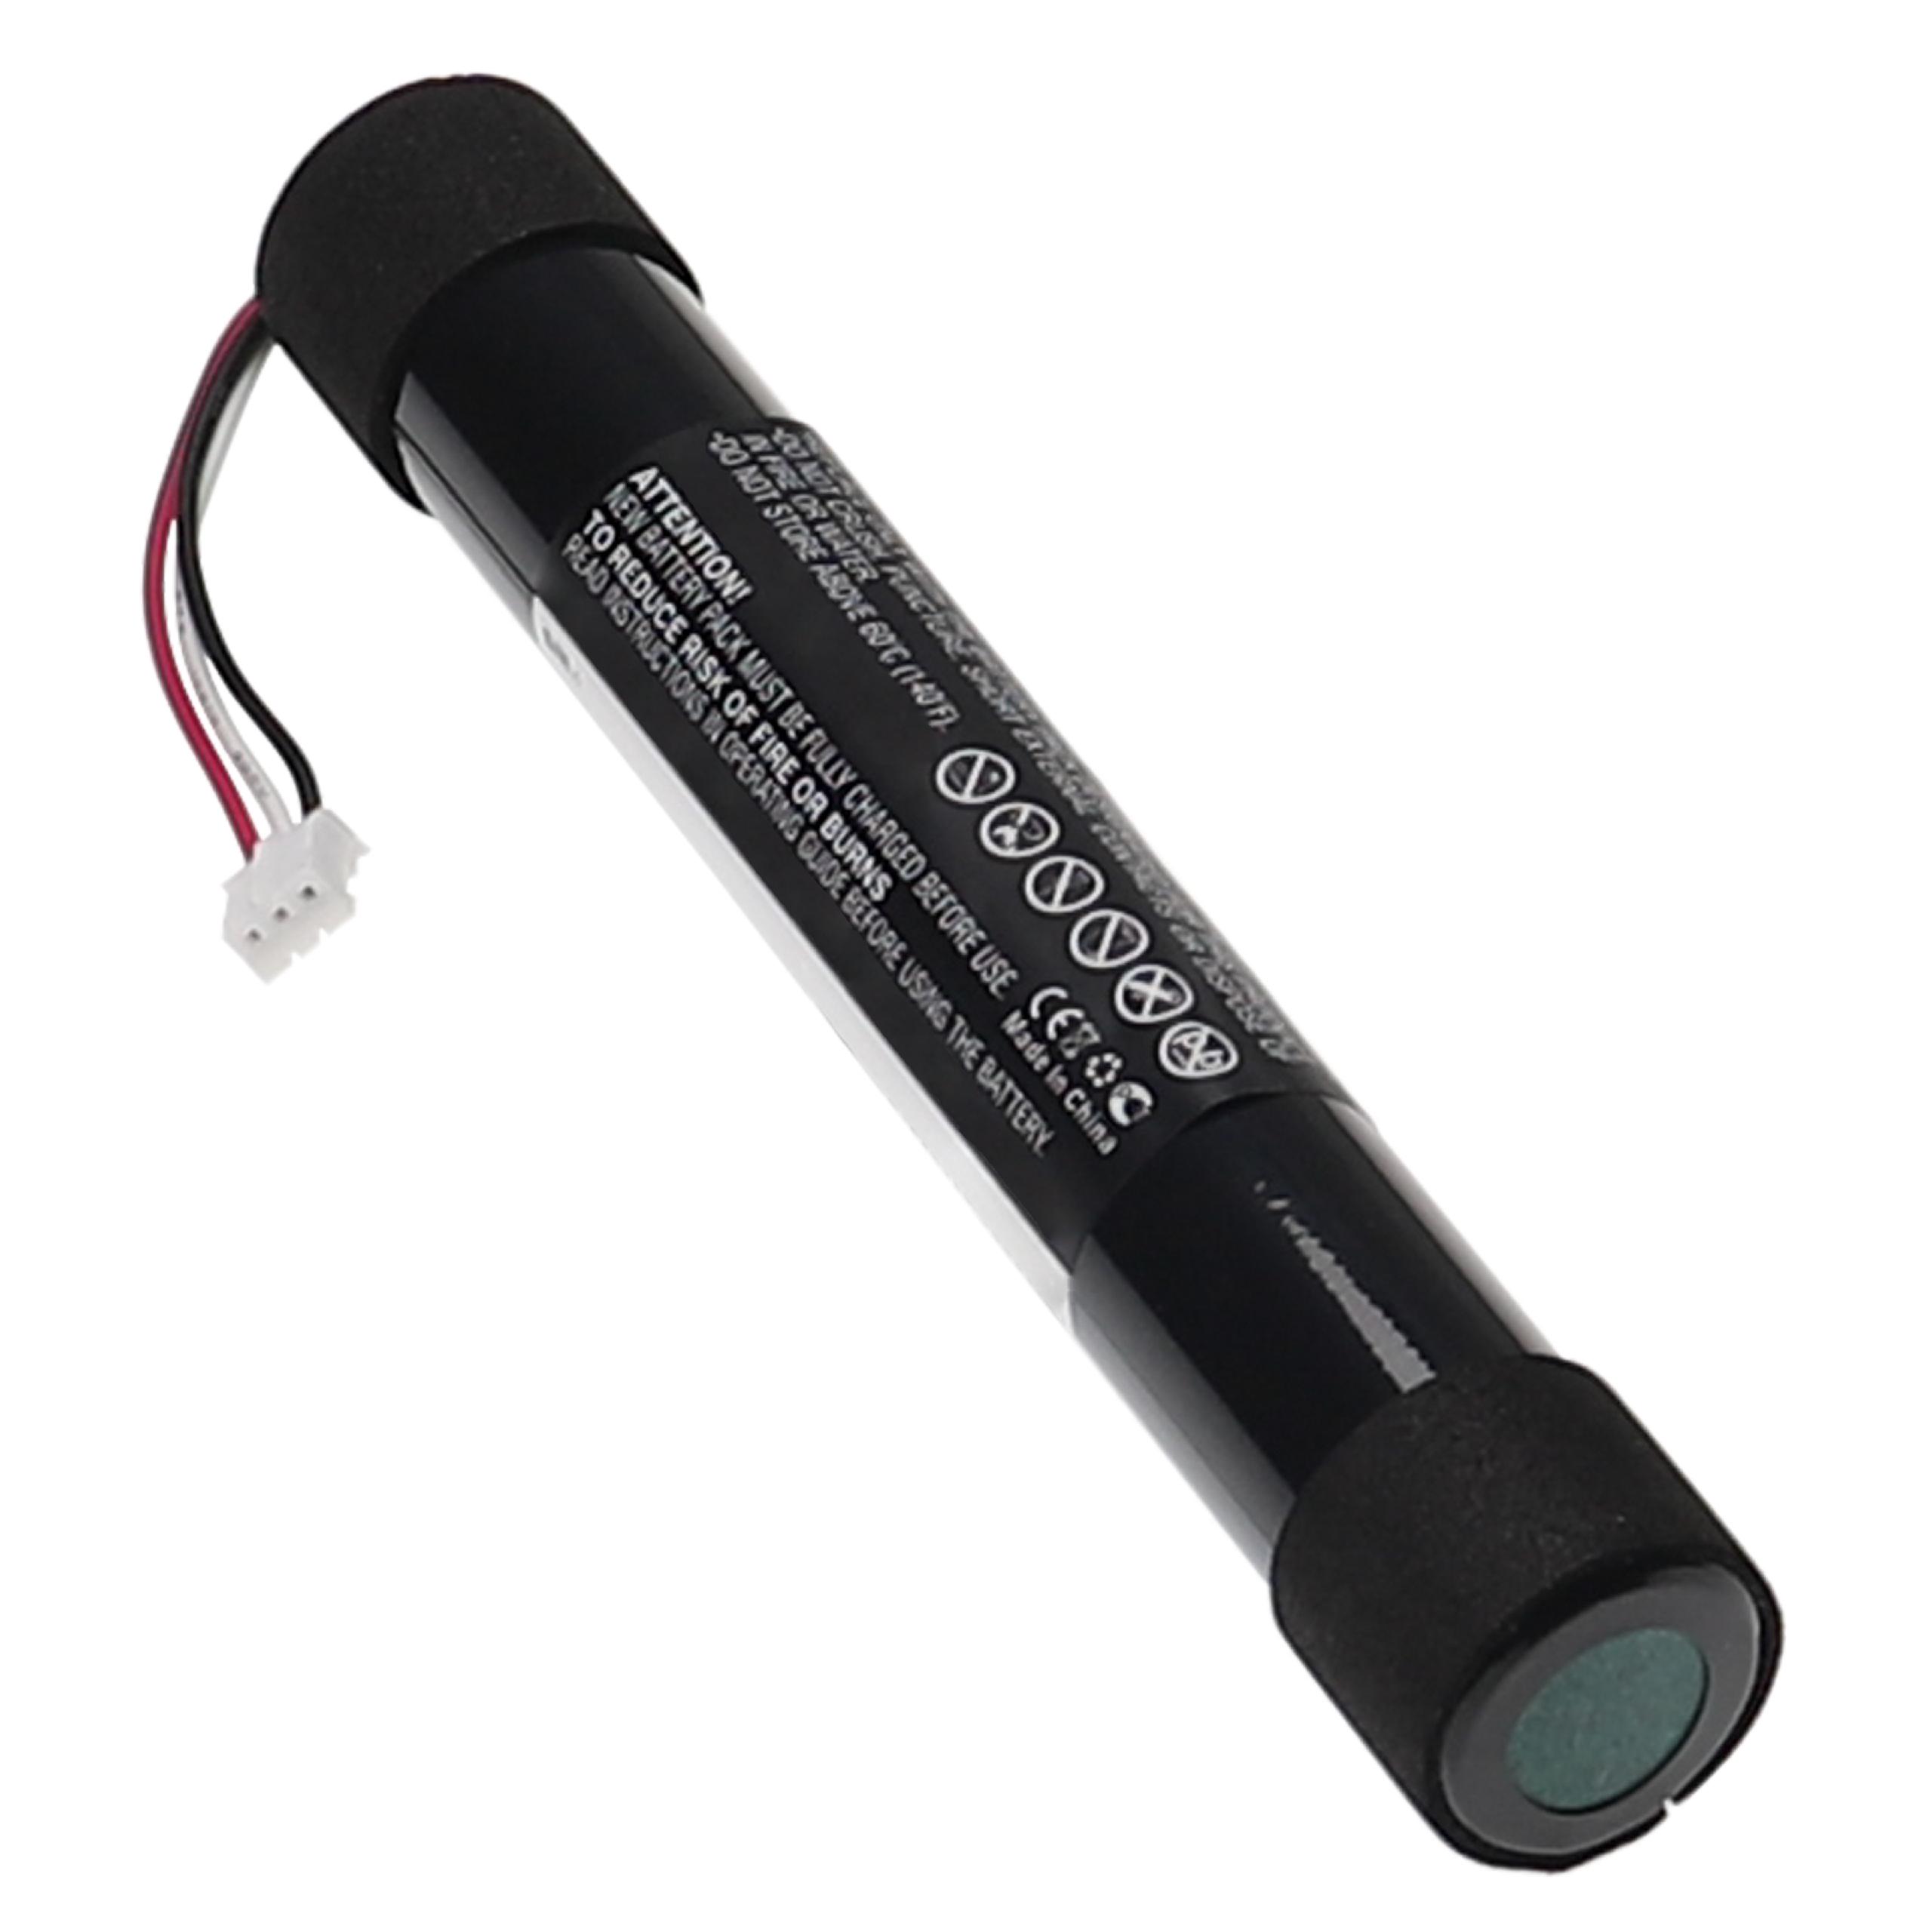  Battery replaces Sony LIS2181HNPD for SonyLoudspeaker - Li-Ion 2600 mAh